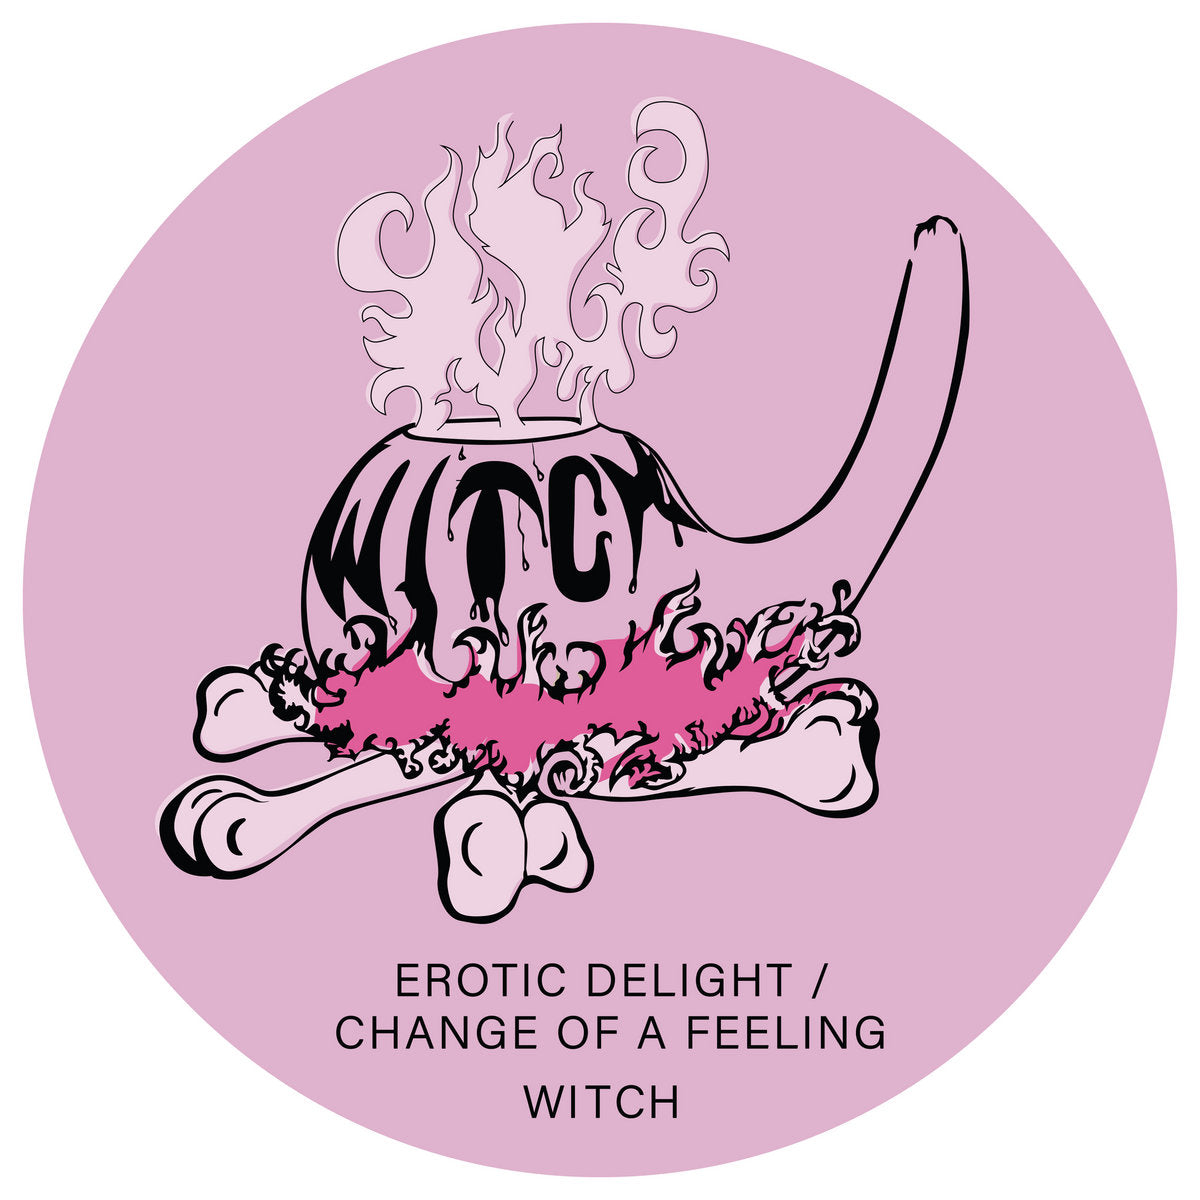 "Erotic Delight" / "Change of a Feeling" (New 7")